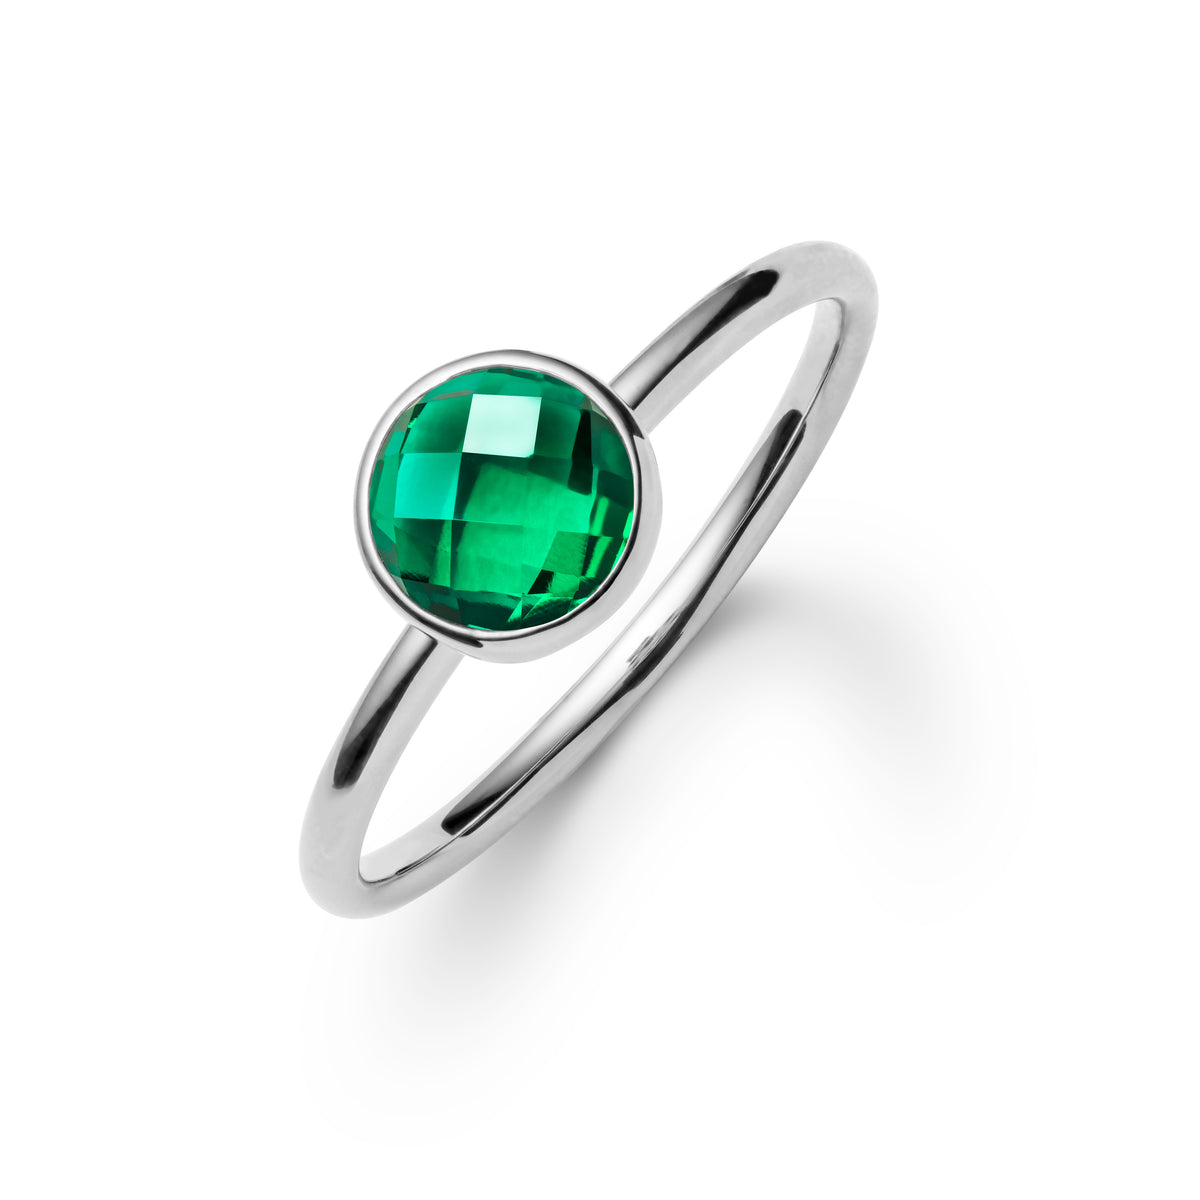 Raw Emerald Cushion Cut Gemstone 925 Solid Sterling Silver Ring,Green Stone,Gift  — Discovered